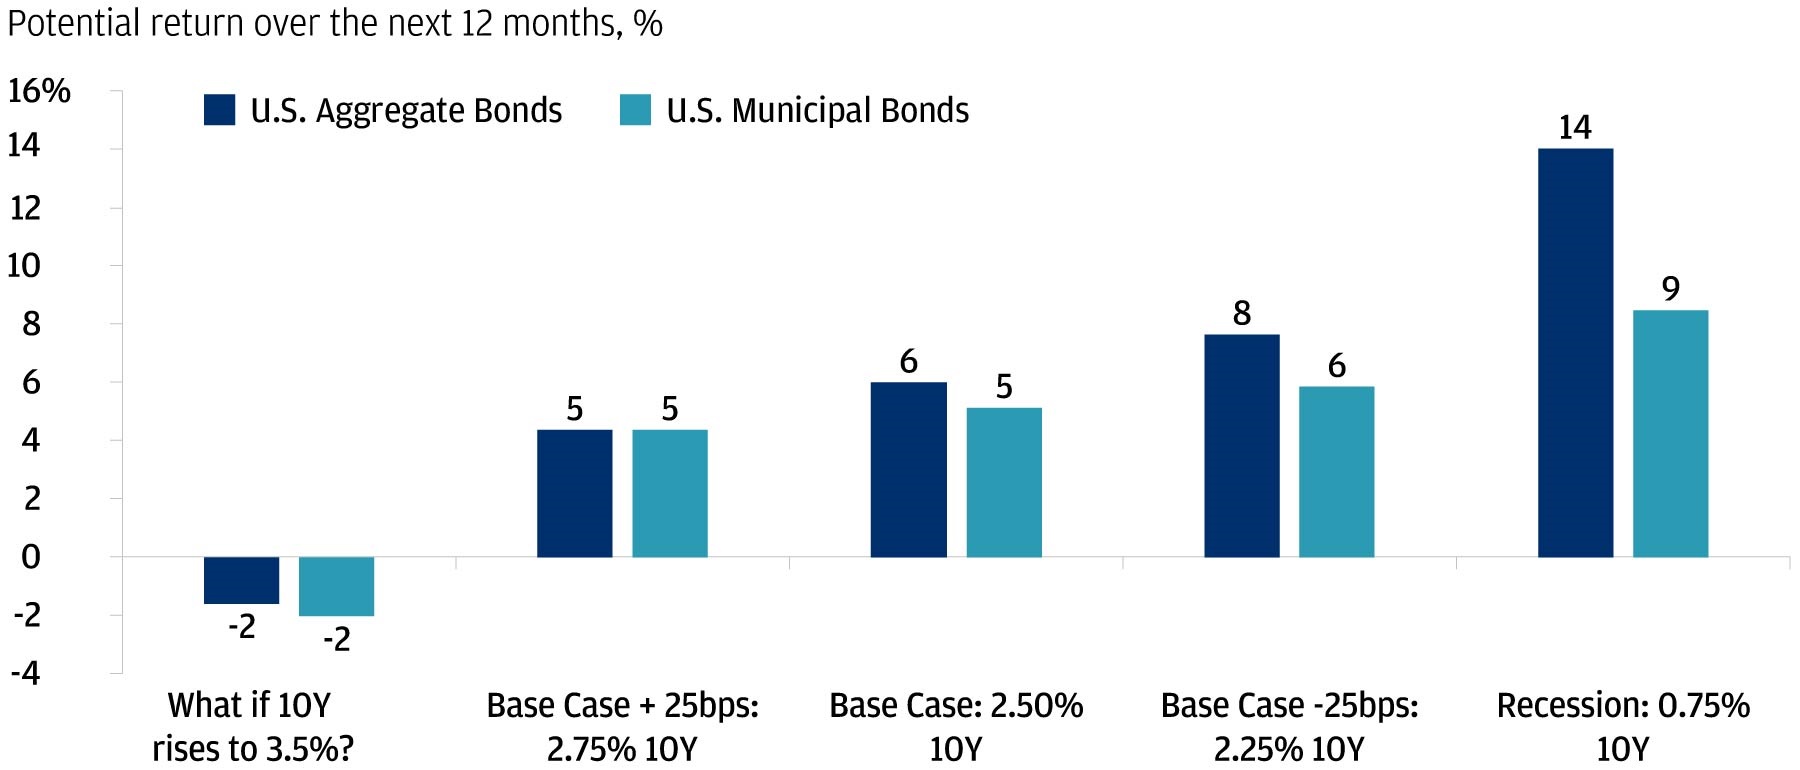 This chart shows the potential returns for U.S. Aggregate Bonds and Municipal bonds in different scenario